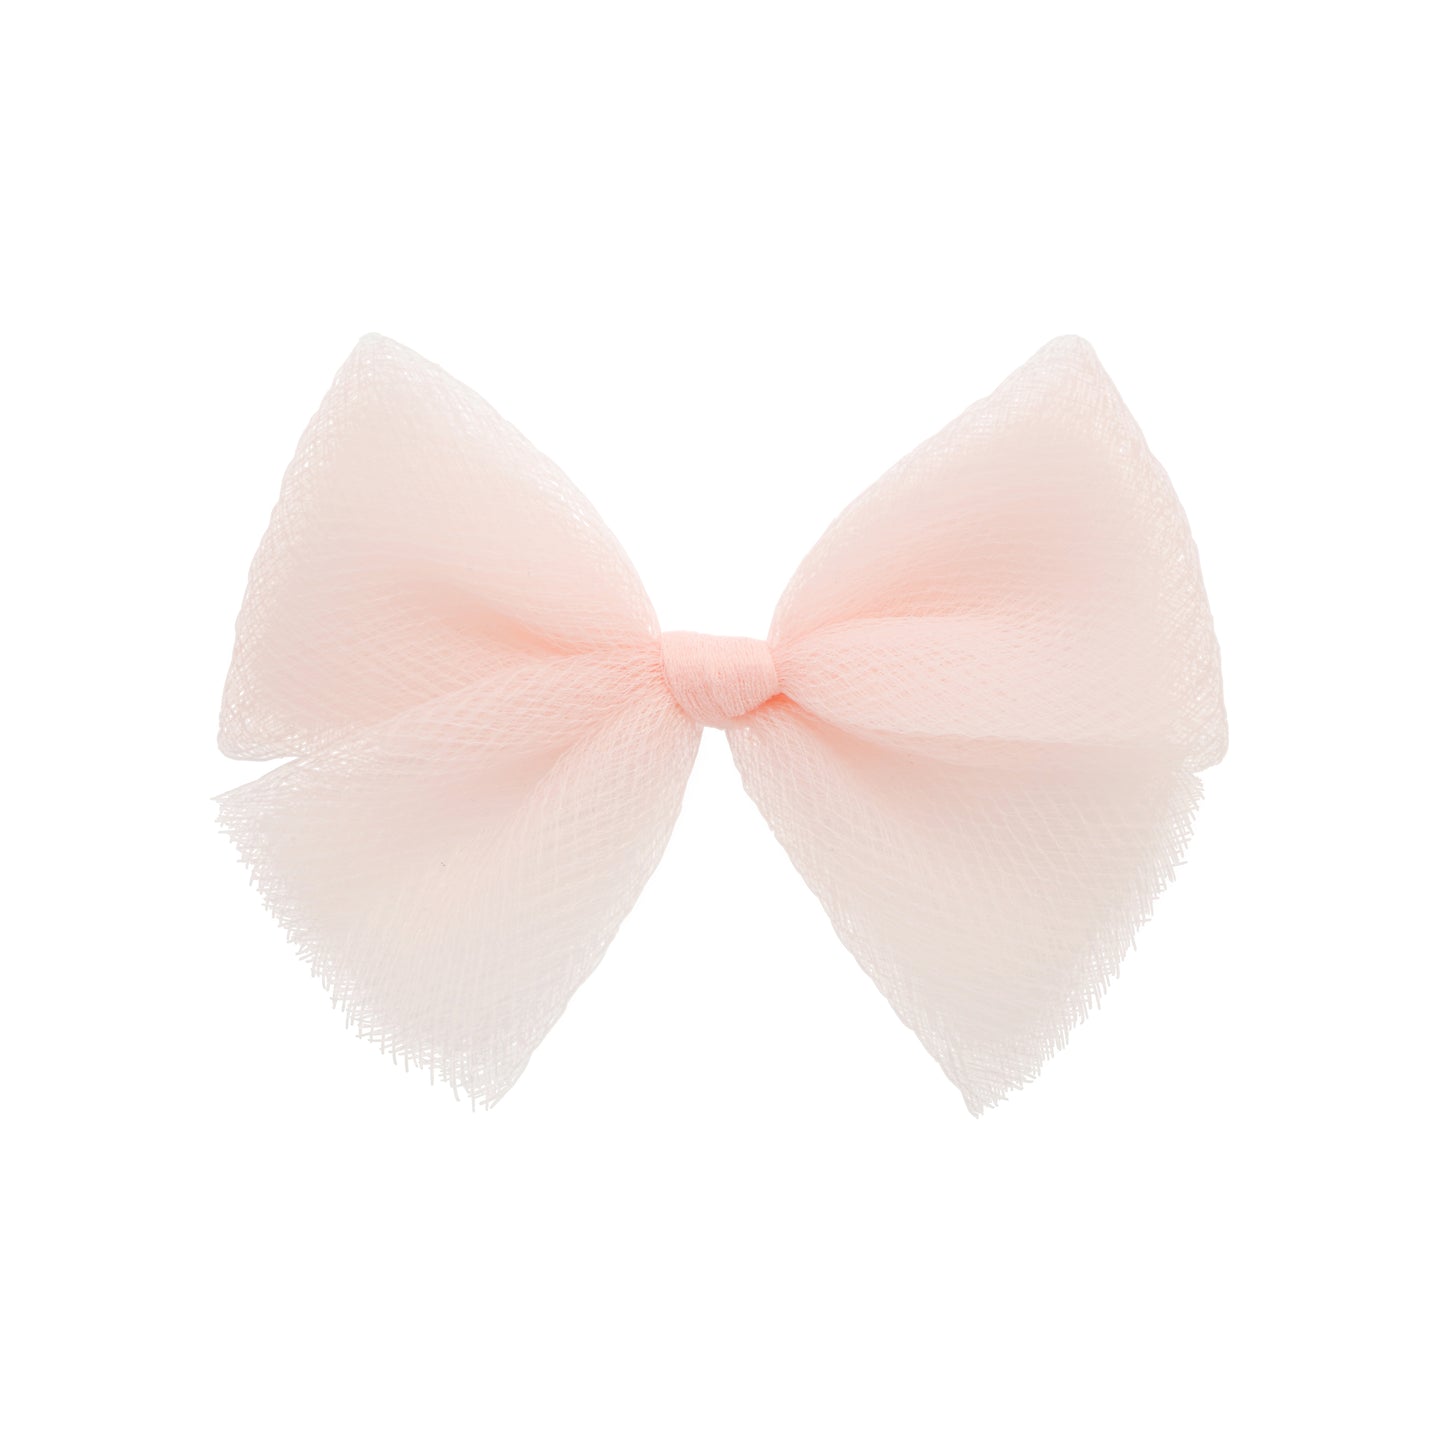 Ballet Bow for Babies and Big Girls: Alice